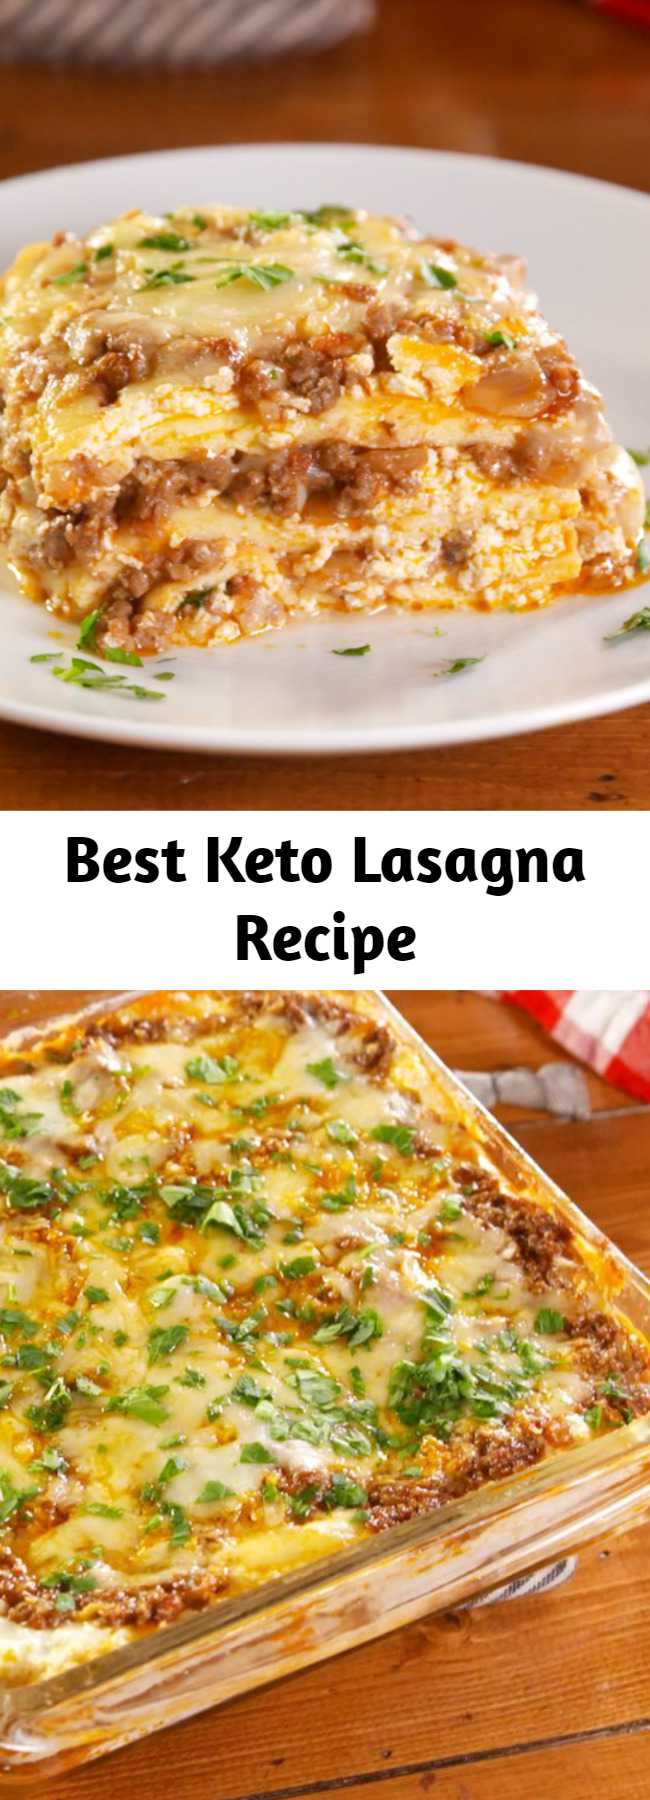 Best Keto Lasagna Recipe - Going Keto can be hard when you start thinking about what you'll be missing. Luckily, a classic lasagna won't be one of them. This lasagna uses a simple noodle replacement that once it's covered in meat and cheese, feels just like pasta. It's the comforting dish you no longer have to crave. #easy #recipe #keto #lasagna #ketorecipes #lowcarb #groundbeef #noodless